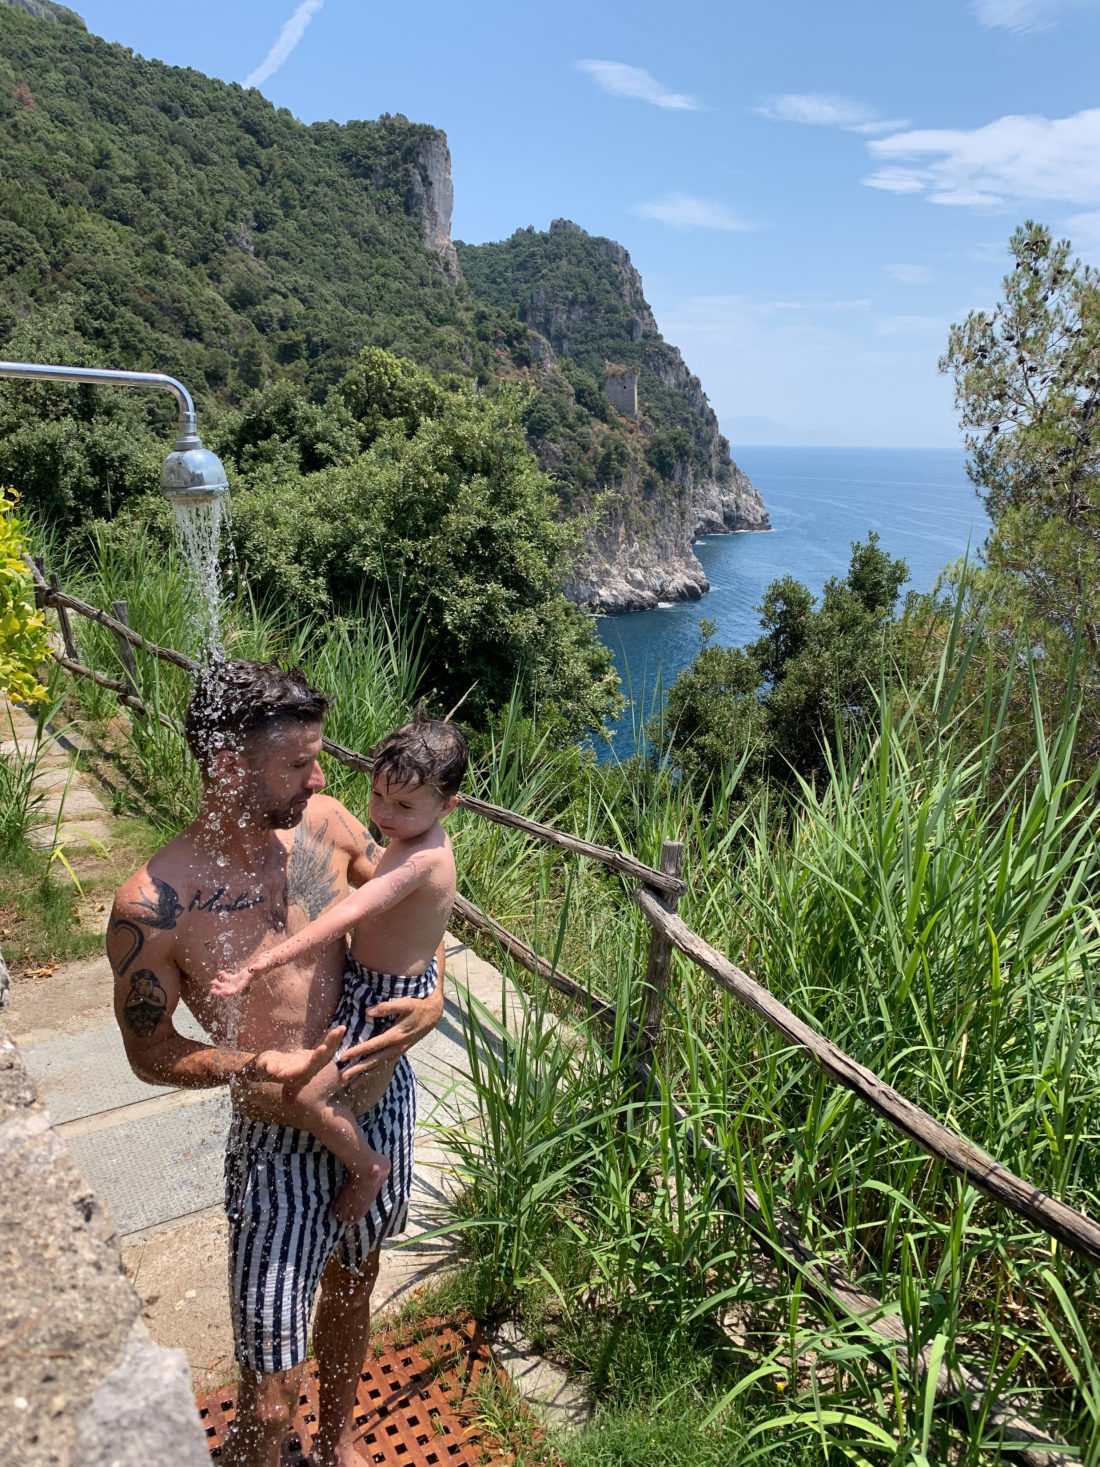 Kyle Martino holds son Major under an outdoor shower in the Amalfi Coast